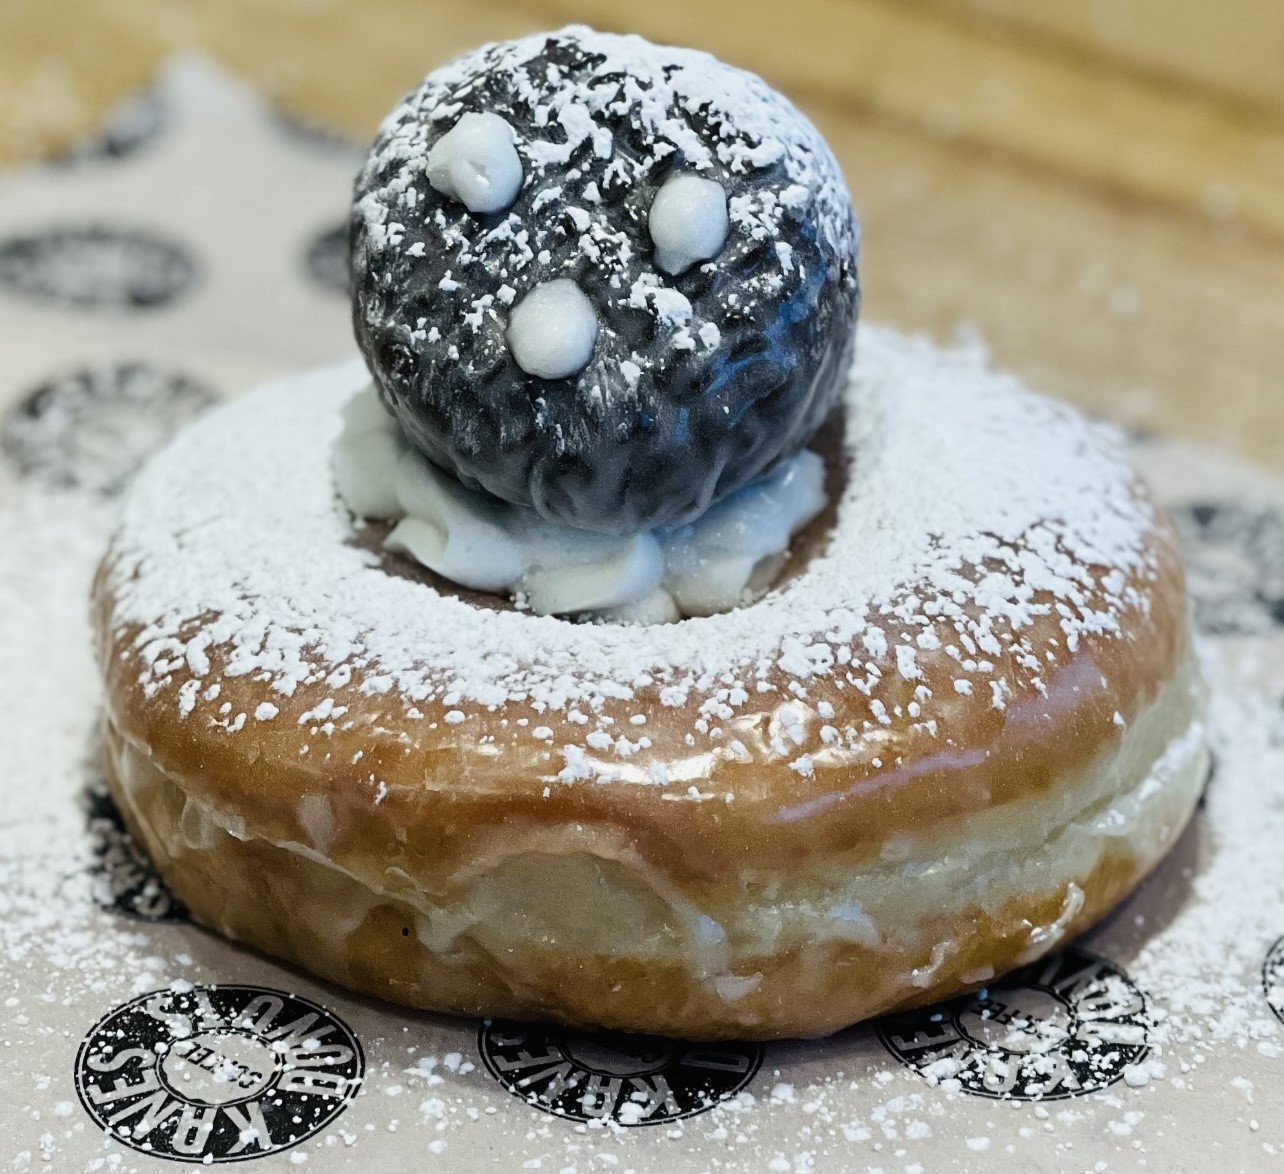 A specialty Groundhog Day donut at Kane's Donuts in Massachusetts